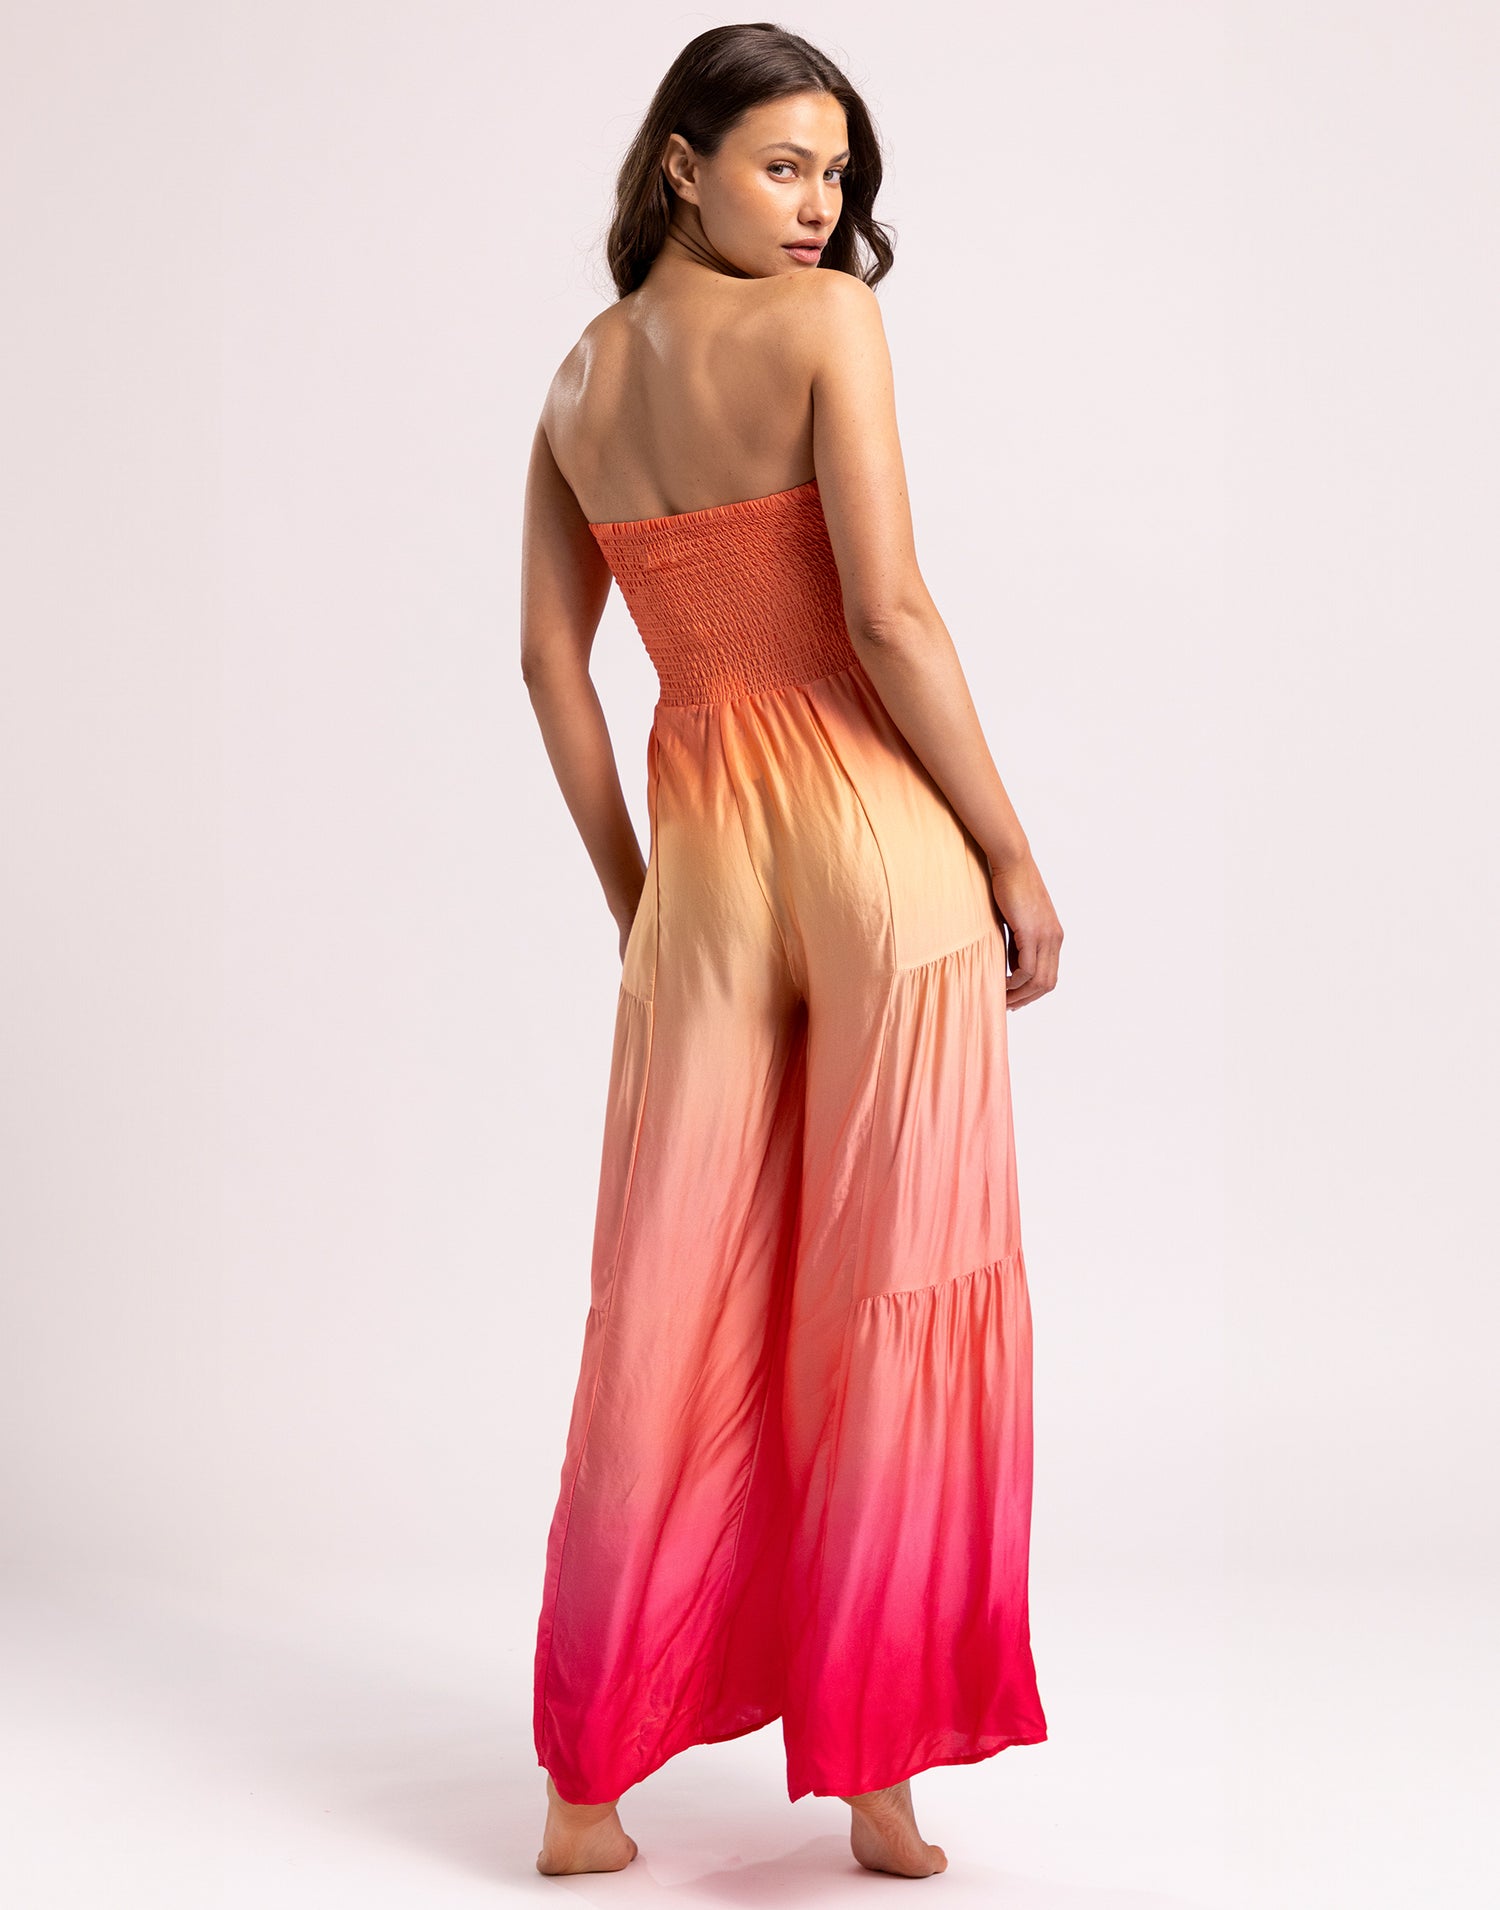 Dip Dye Jumpsuit in Sunset Ombre - Back View